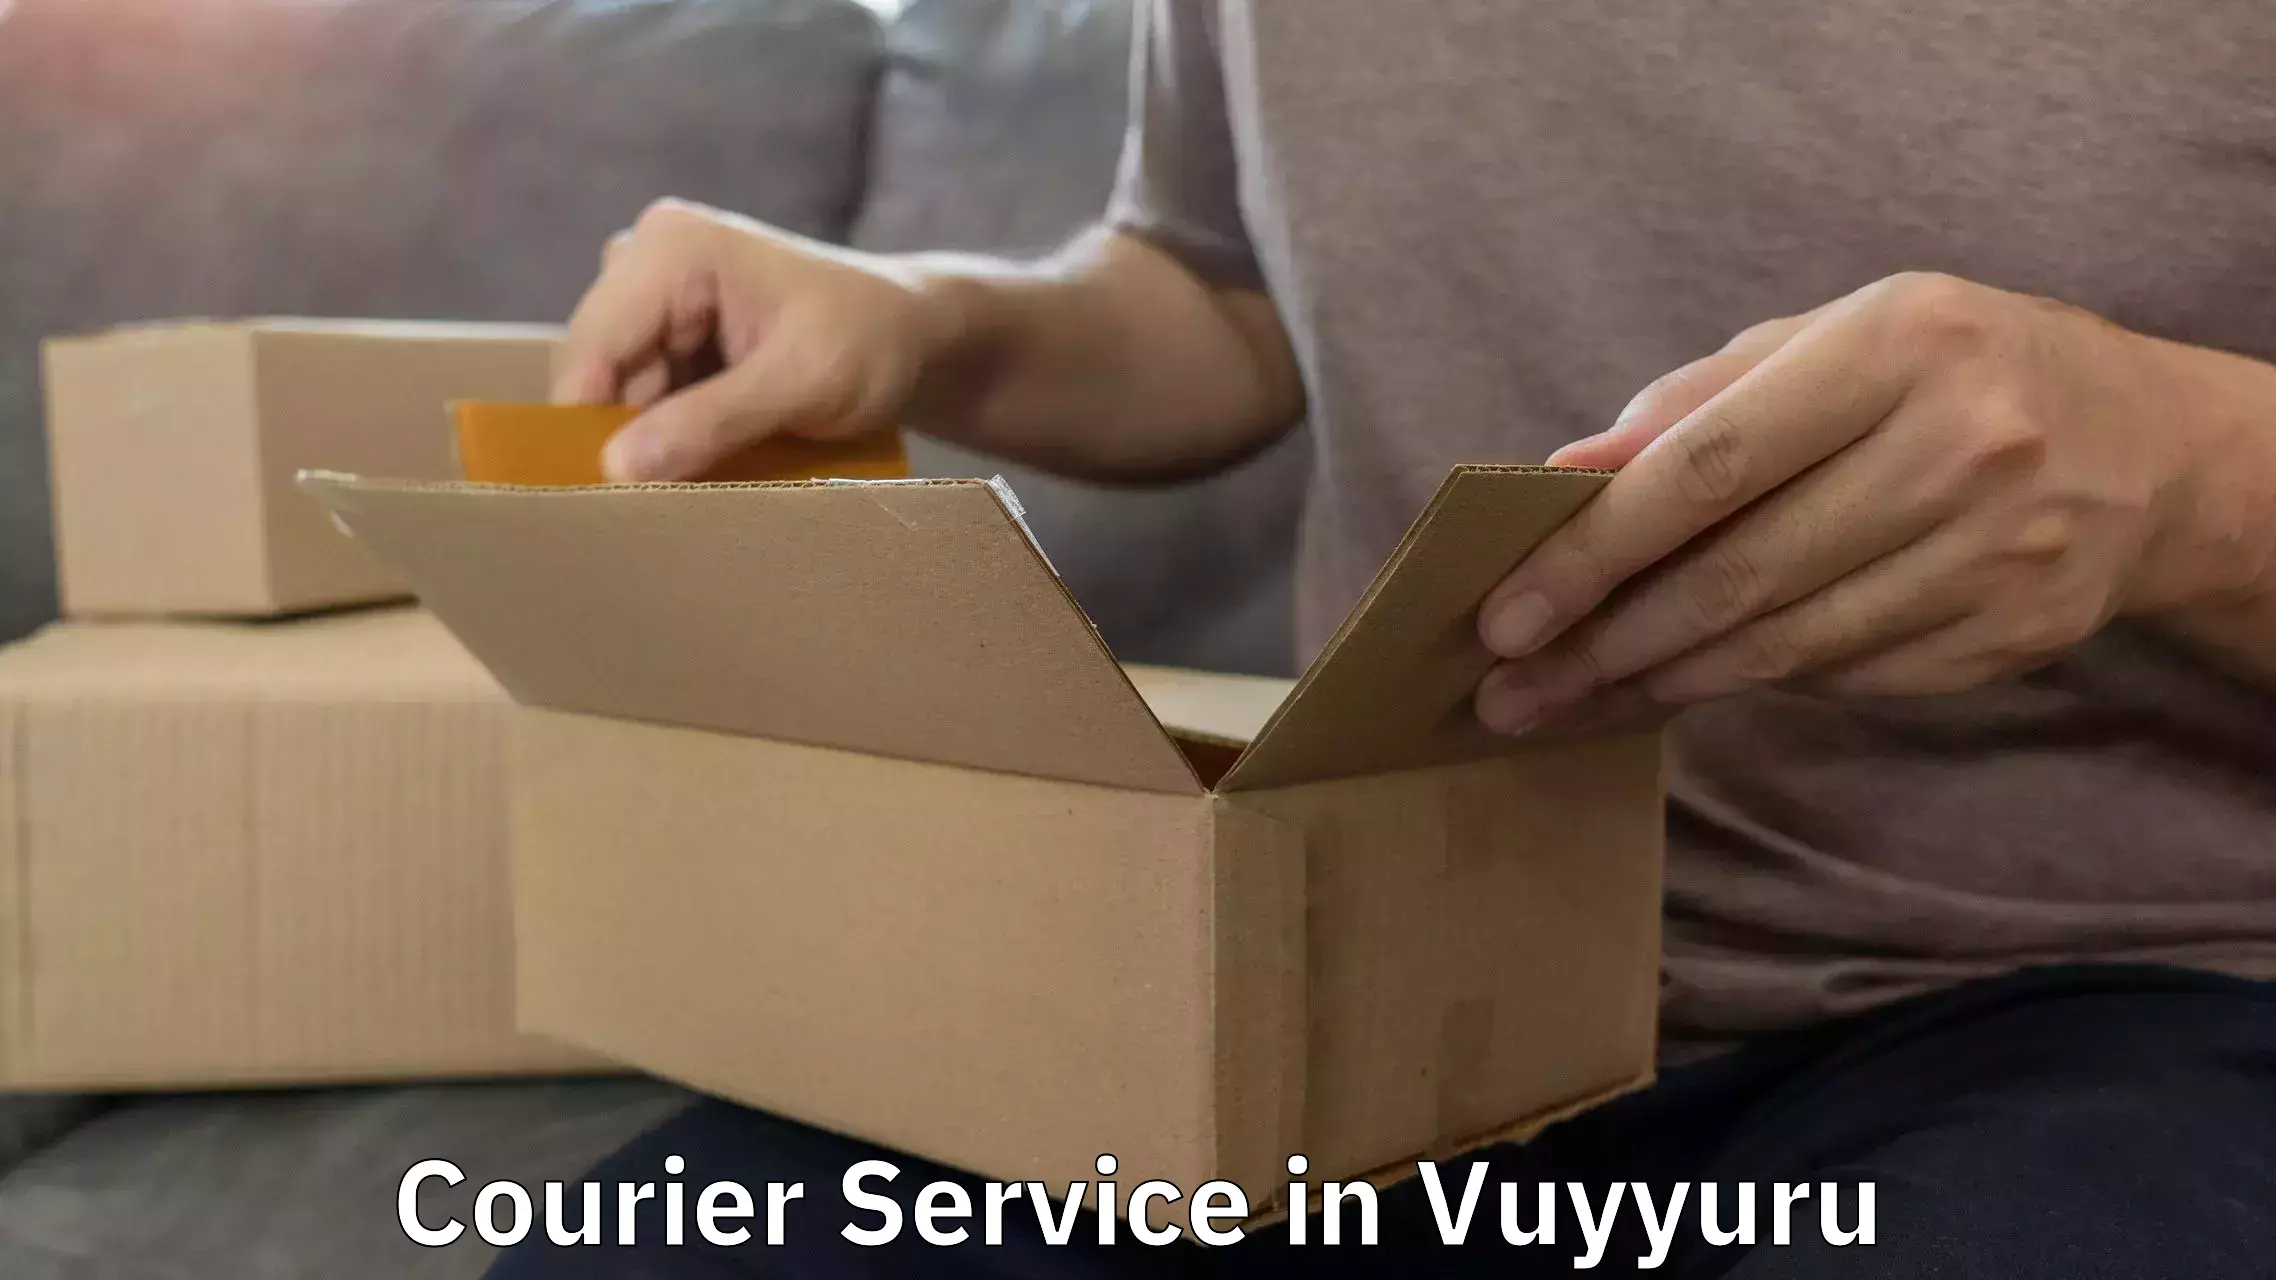 State-of-the-art courier technology in Vuyyuru